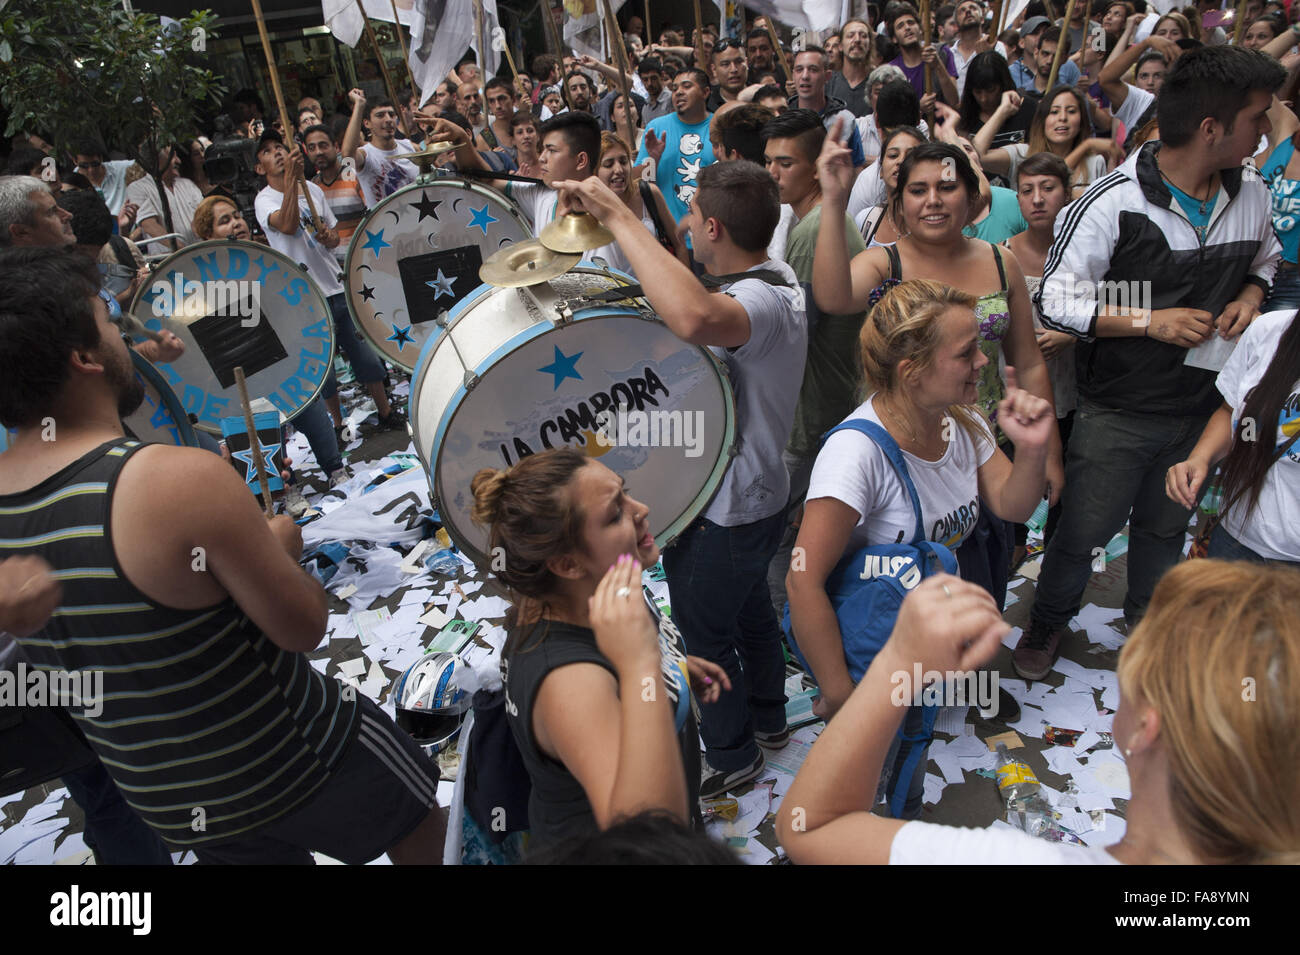 Buenos Aires, Argentina. 23rd Dec, 2015. Supporters of Director MartÃn Sabatella gather outside the building of AFSCA media watchdog after President Mauricio Macri's government announced a decree to take over control. President Macri appointed Agustin Garzon, a man of his own party as Director, but Sabatella, designated by ex-President Cristina Fernandez de Kirchner, refuses to resign arguing that AFSCA is autonomous by law, and his mandate ends in 2017 and can't be revoked by decree. Credit:  Patricio Murphy/ZUMA Wire/Alamy Live News Stock Photo